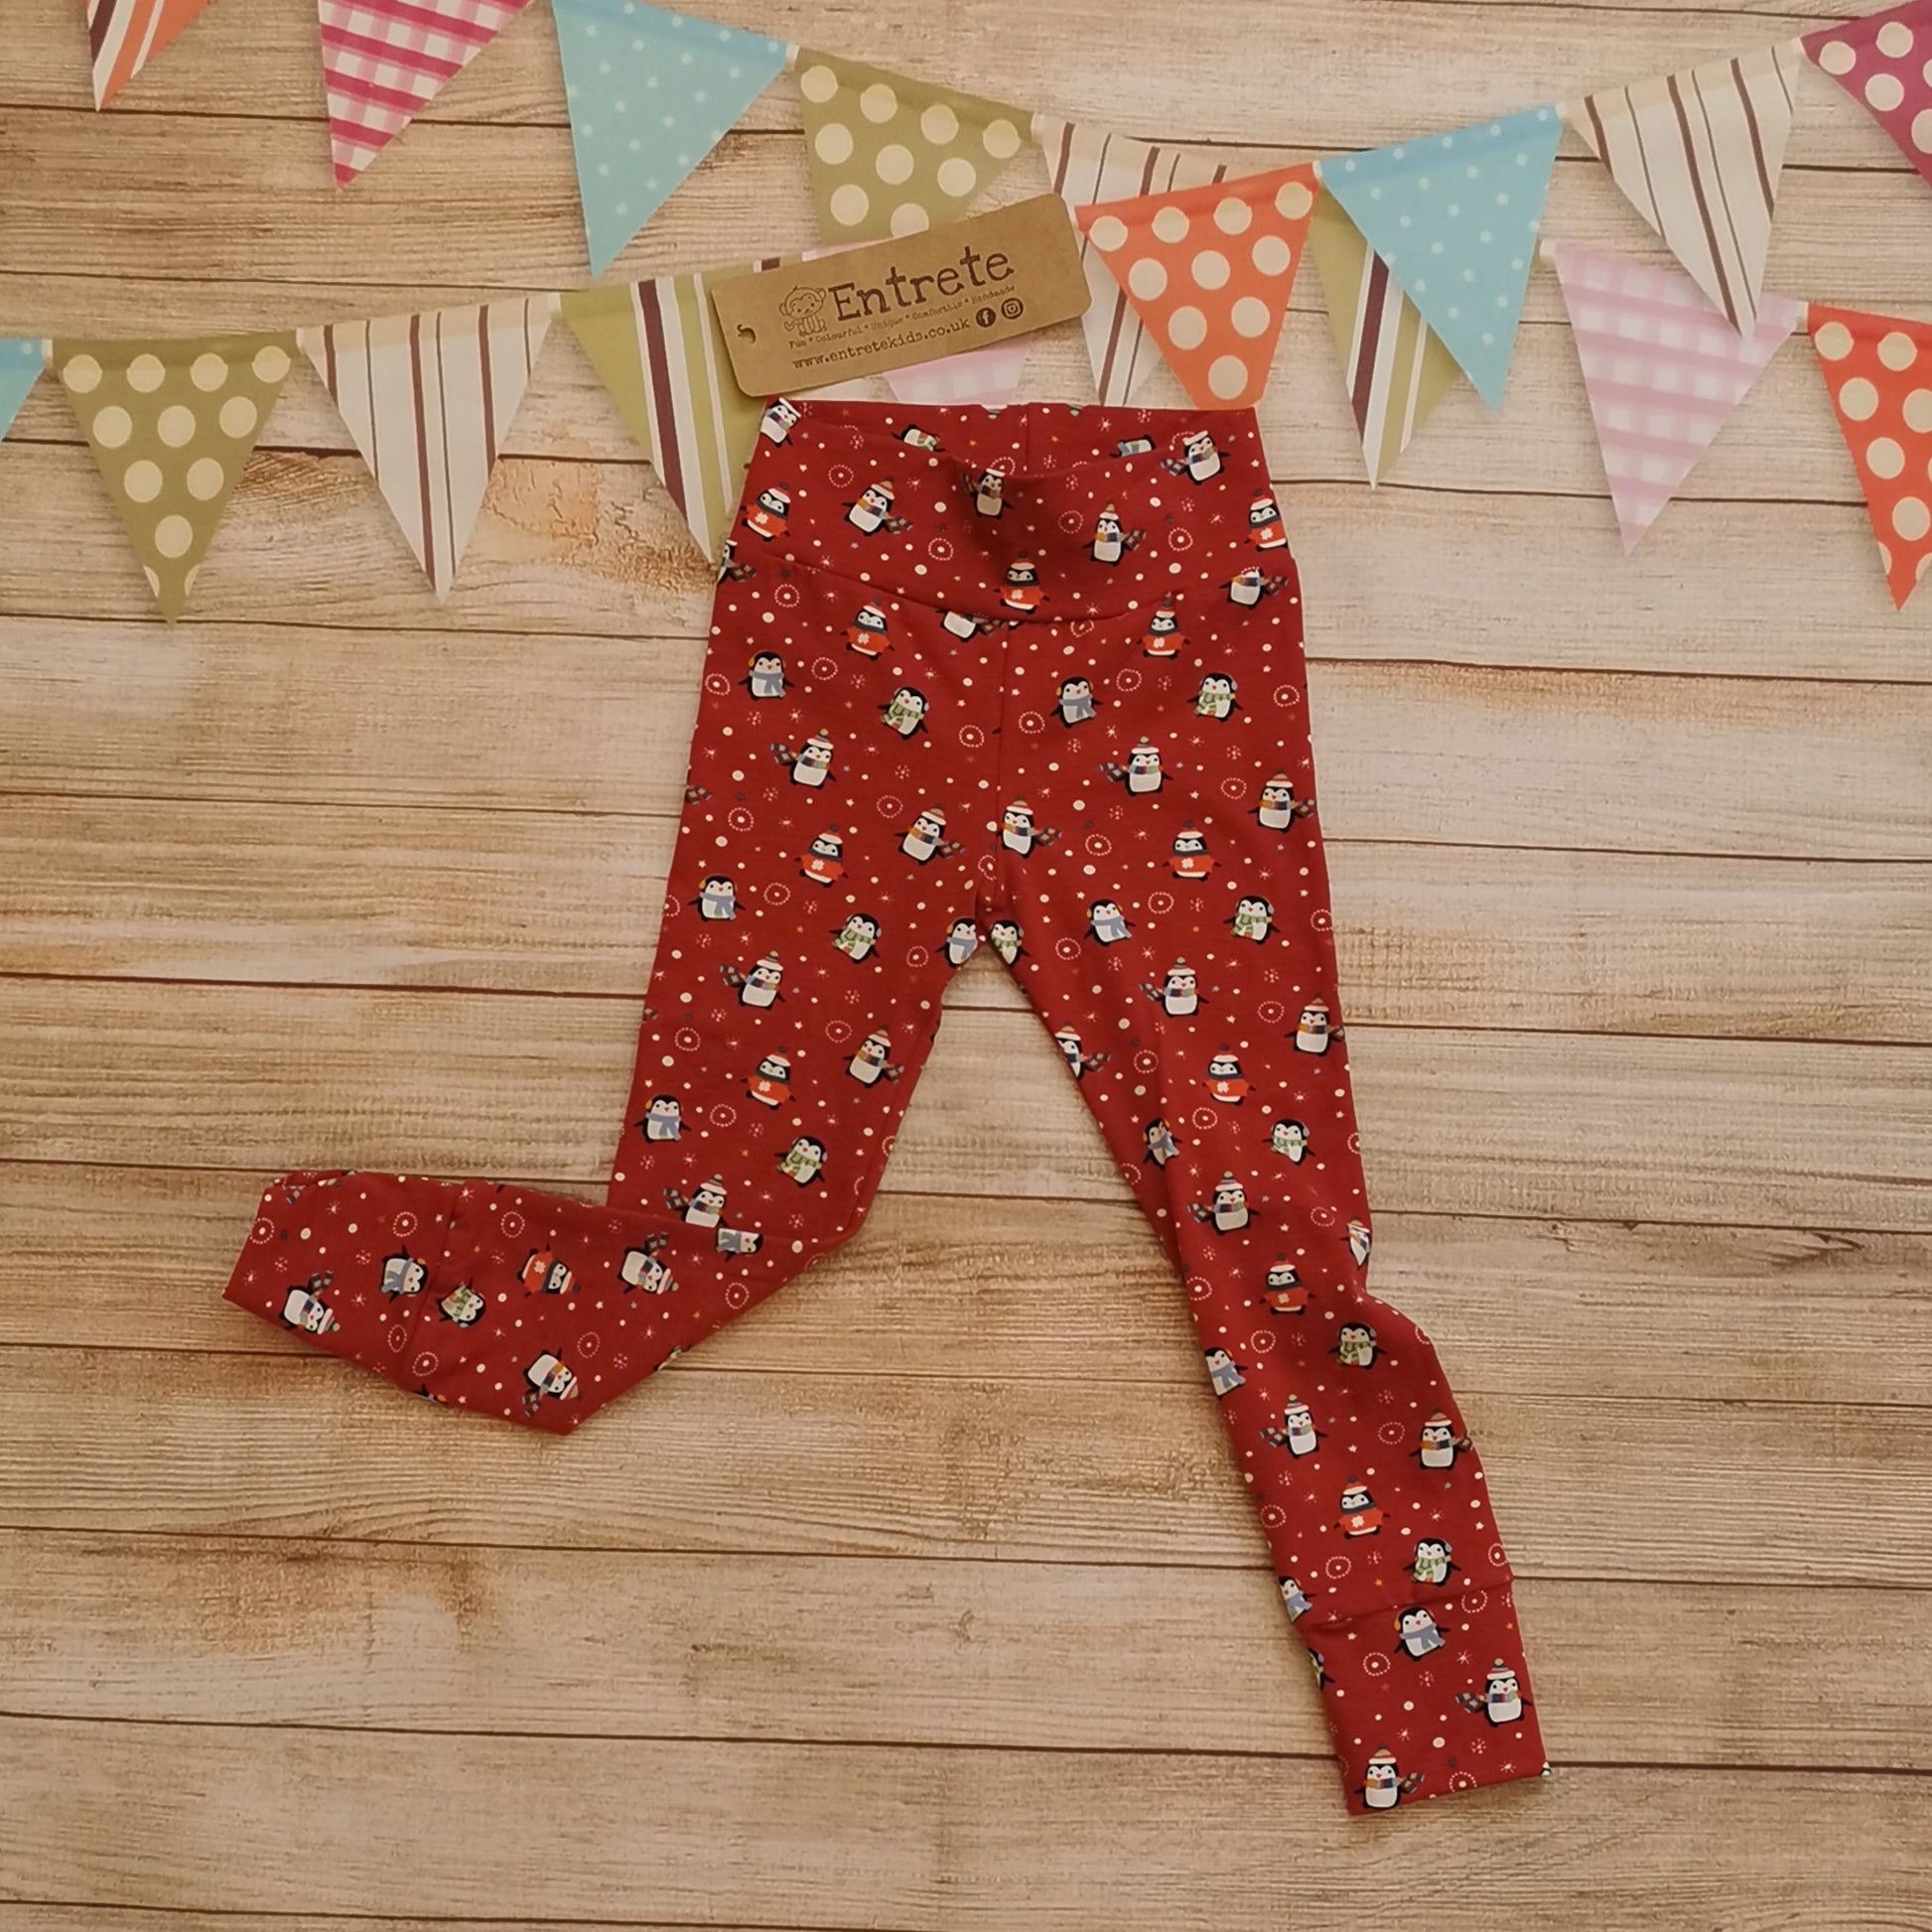 Soft, comfy and very Christmassy! Leggings handmade using festive and fun red penguins cotton jersey. Shown from the front.